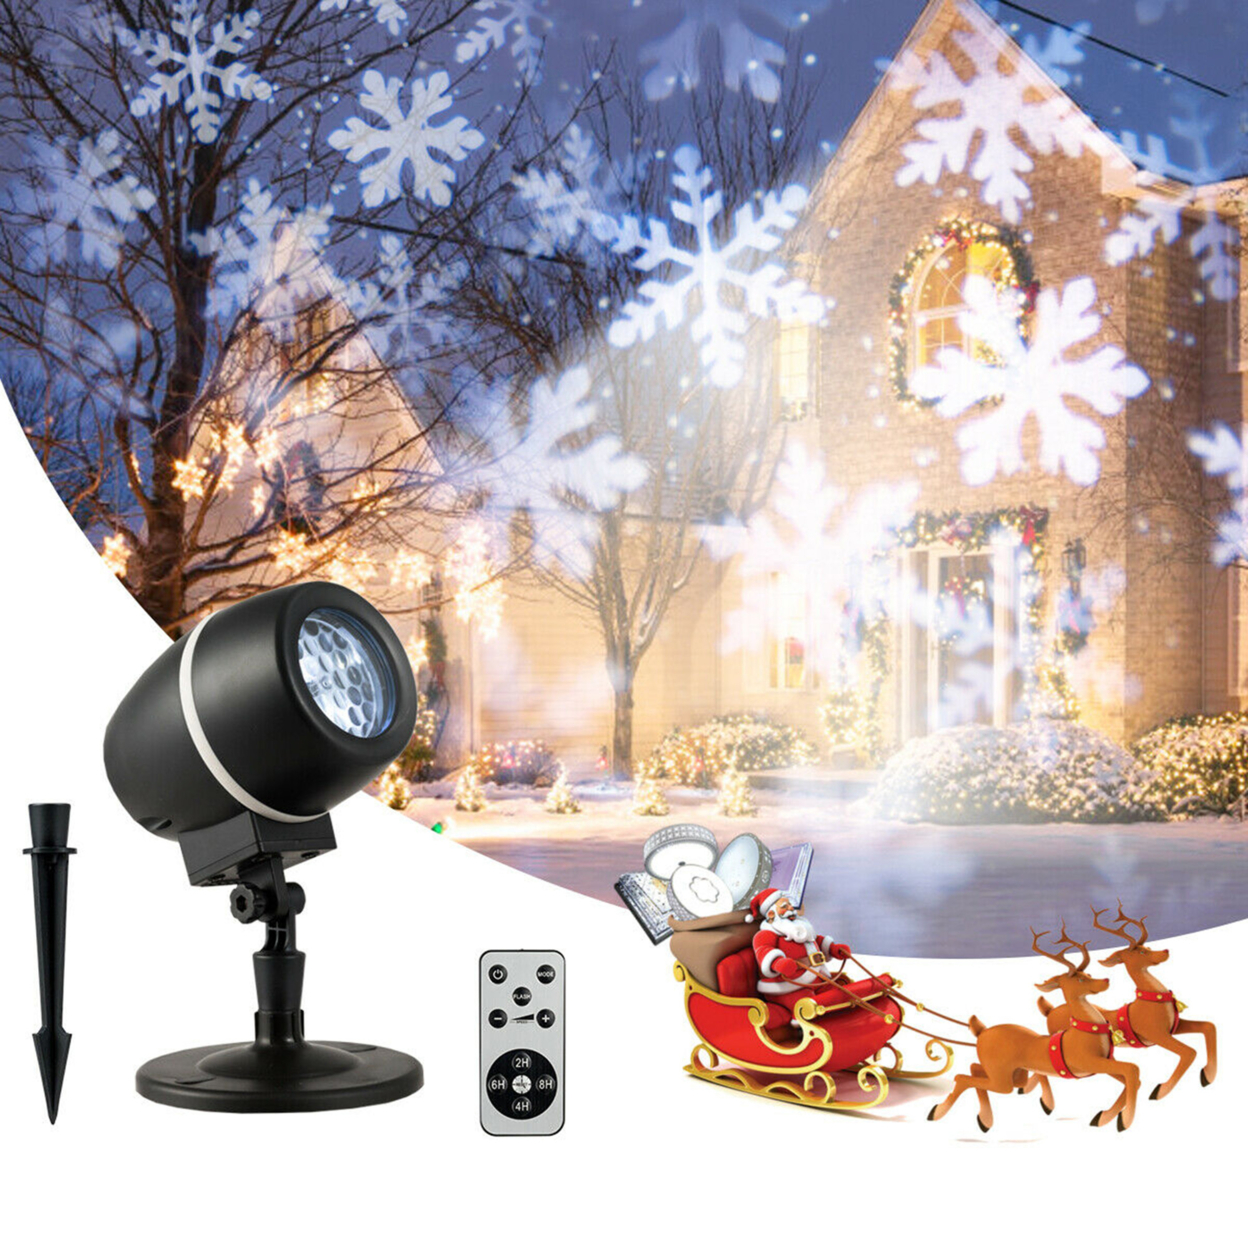 Christmas Snowflake LED Projector Lights Outdoor Waterproof W/ Remote Control